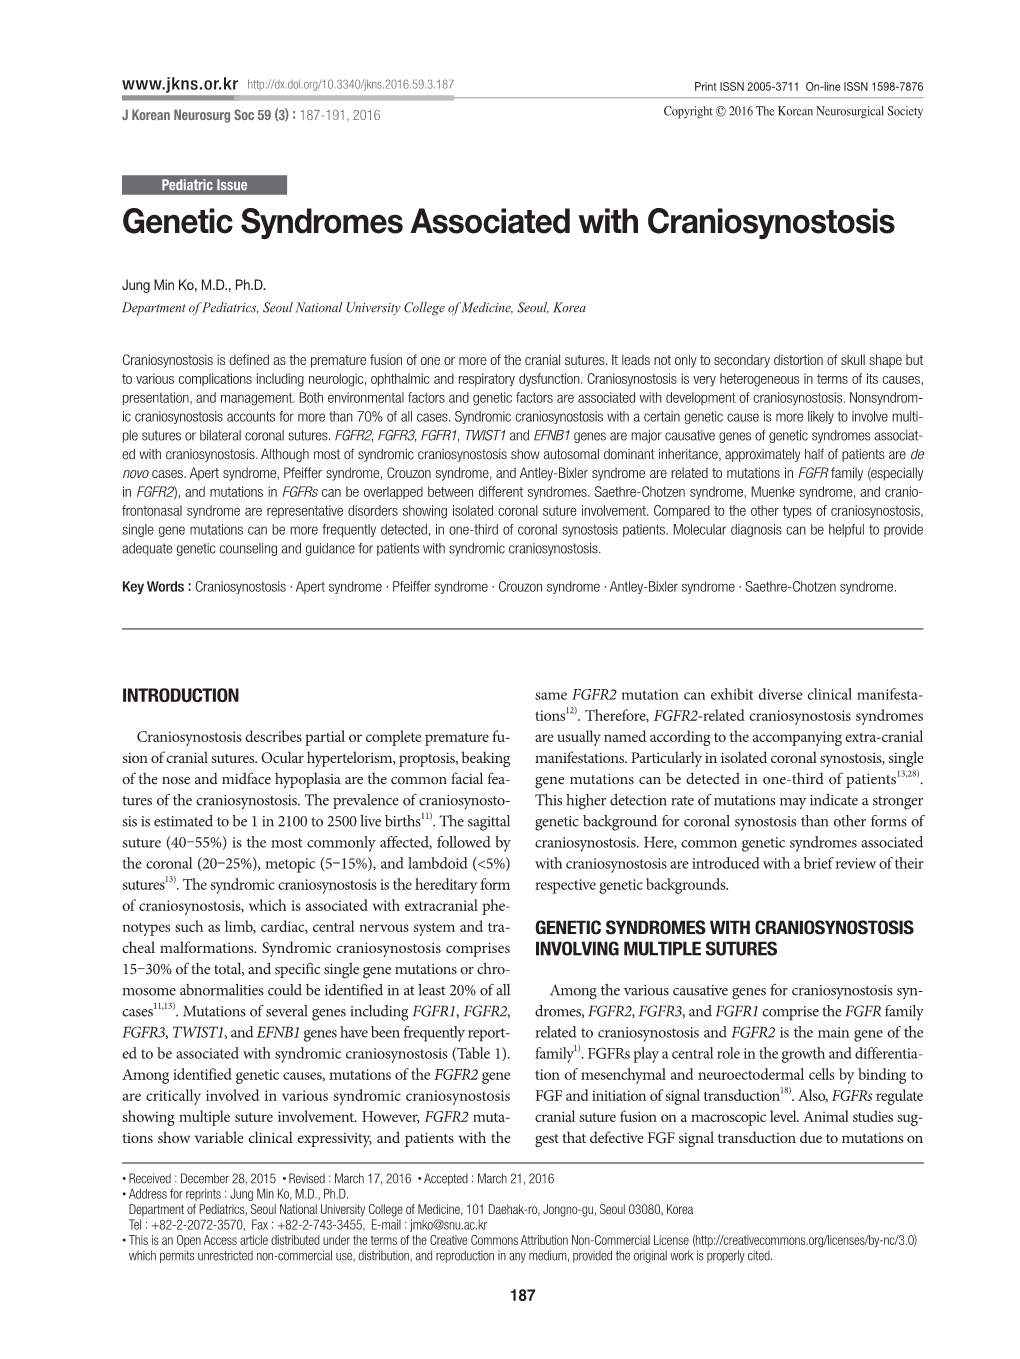 Genetic Syndromes Associated with Craniosynostosis